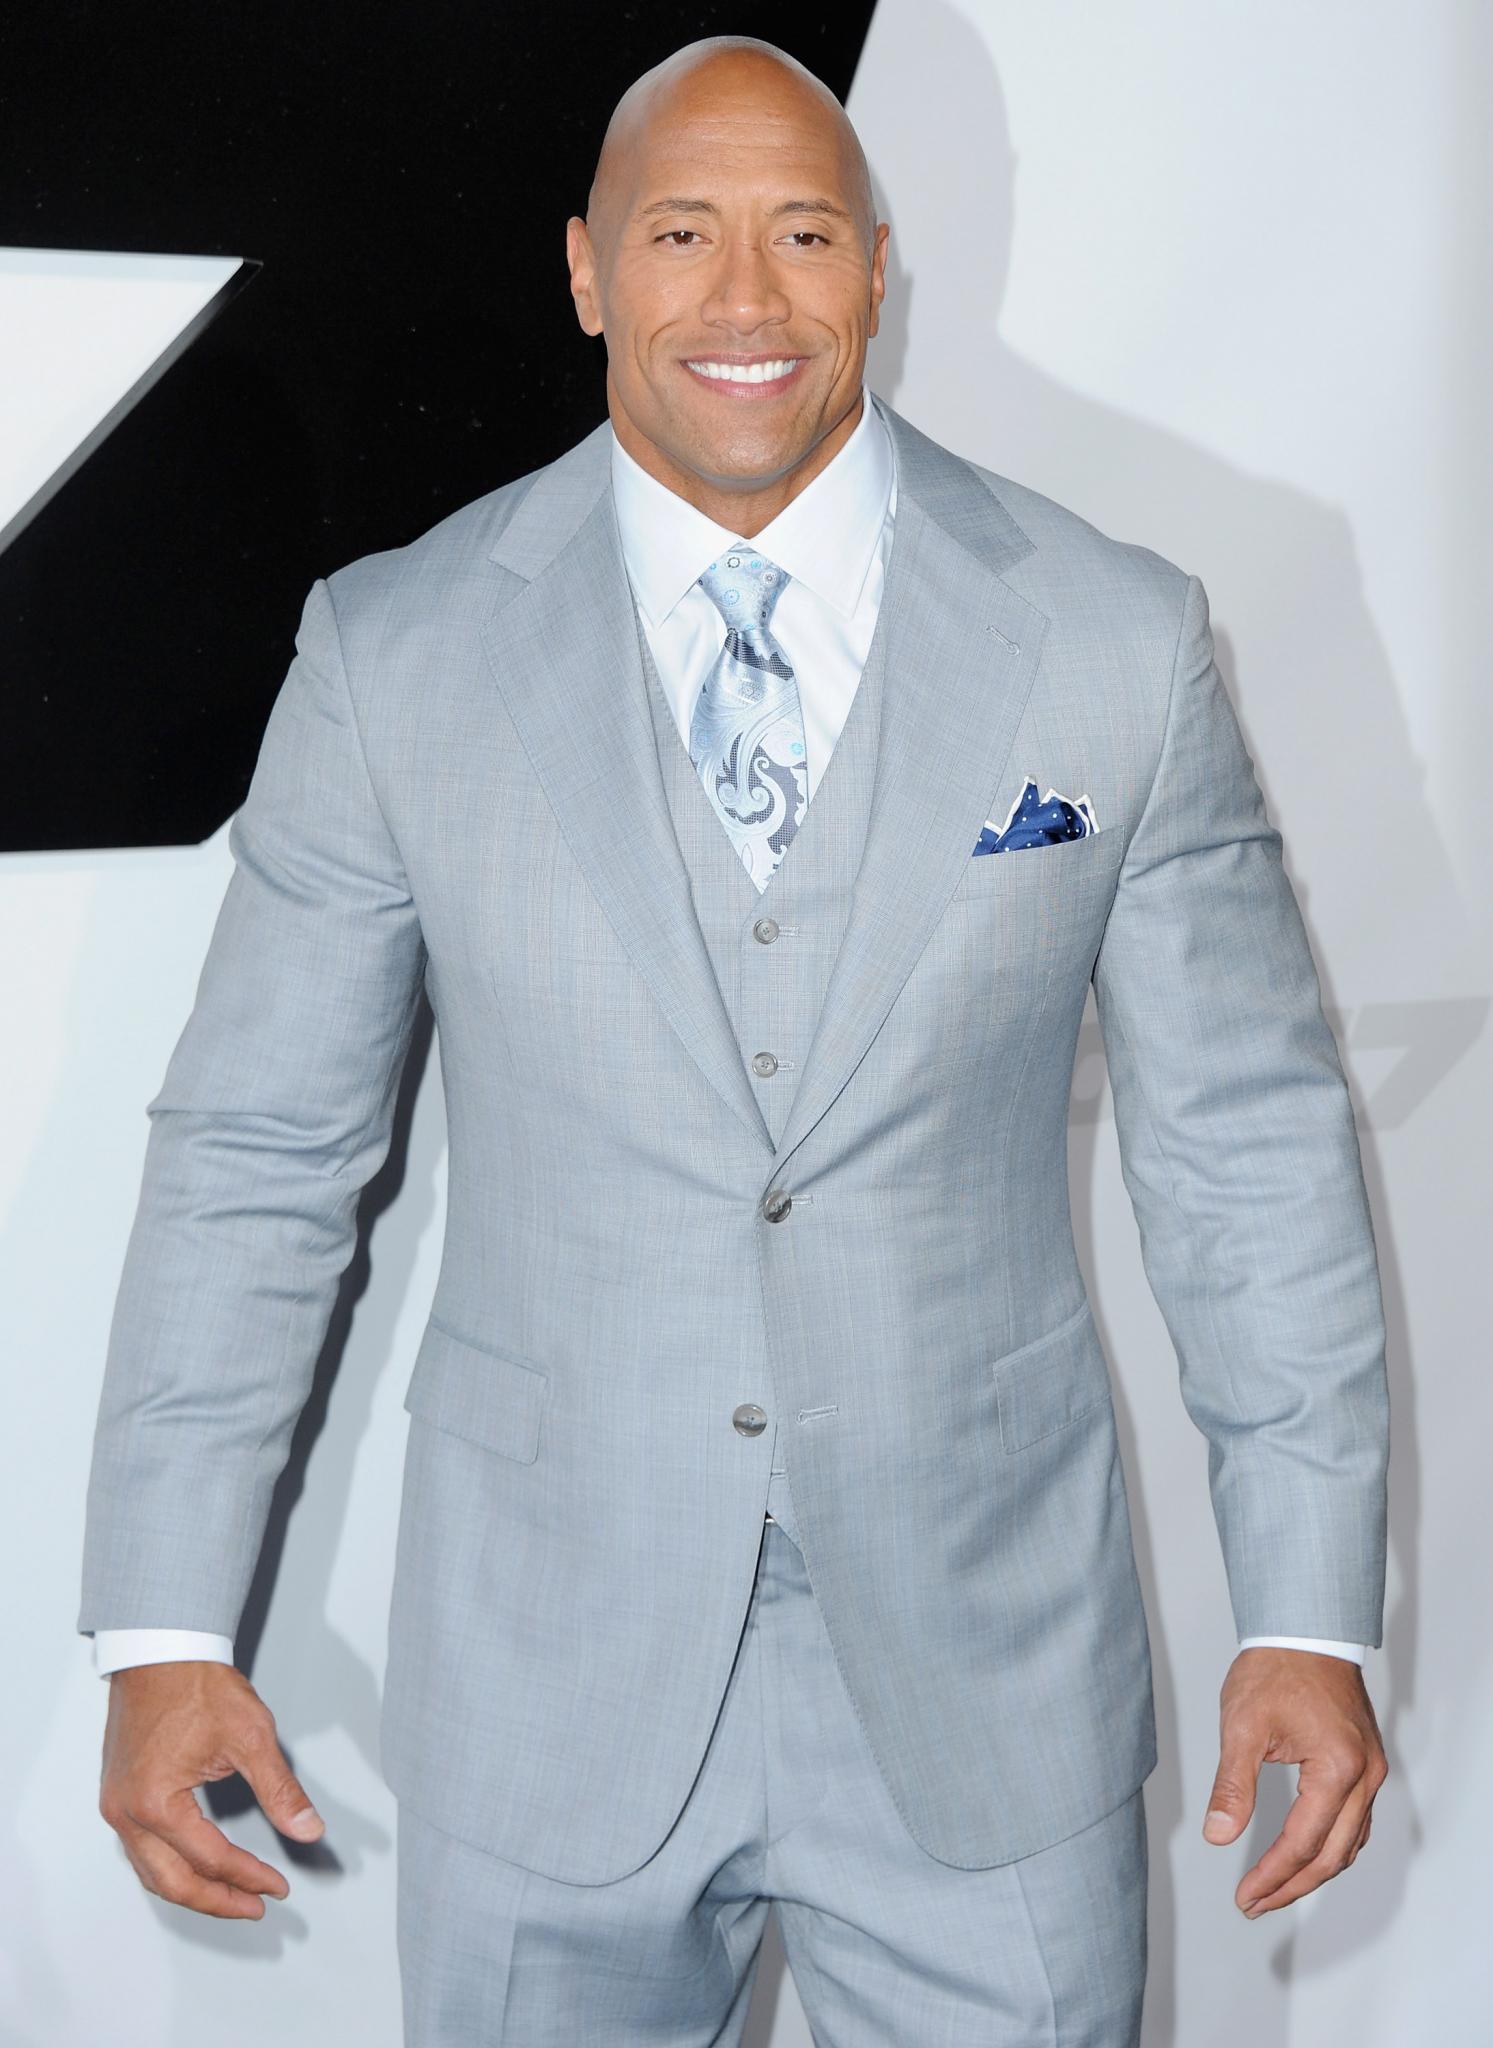 Dwayne 'The Rock' Johnson Gets His Own HBO Series